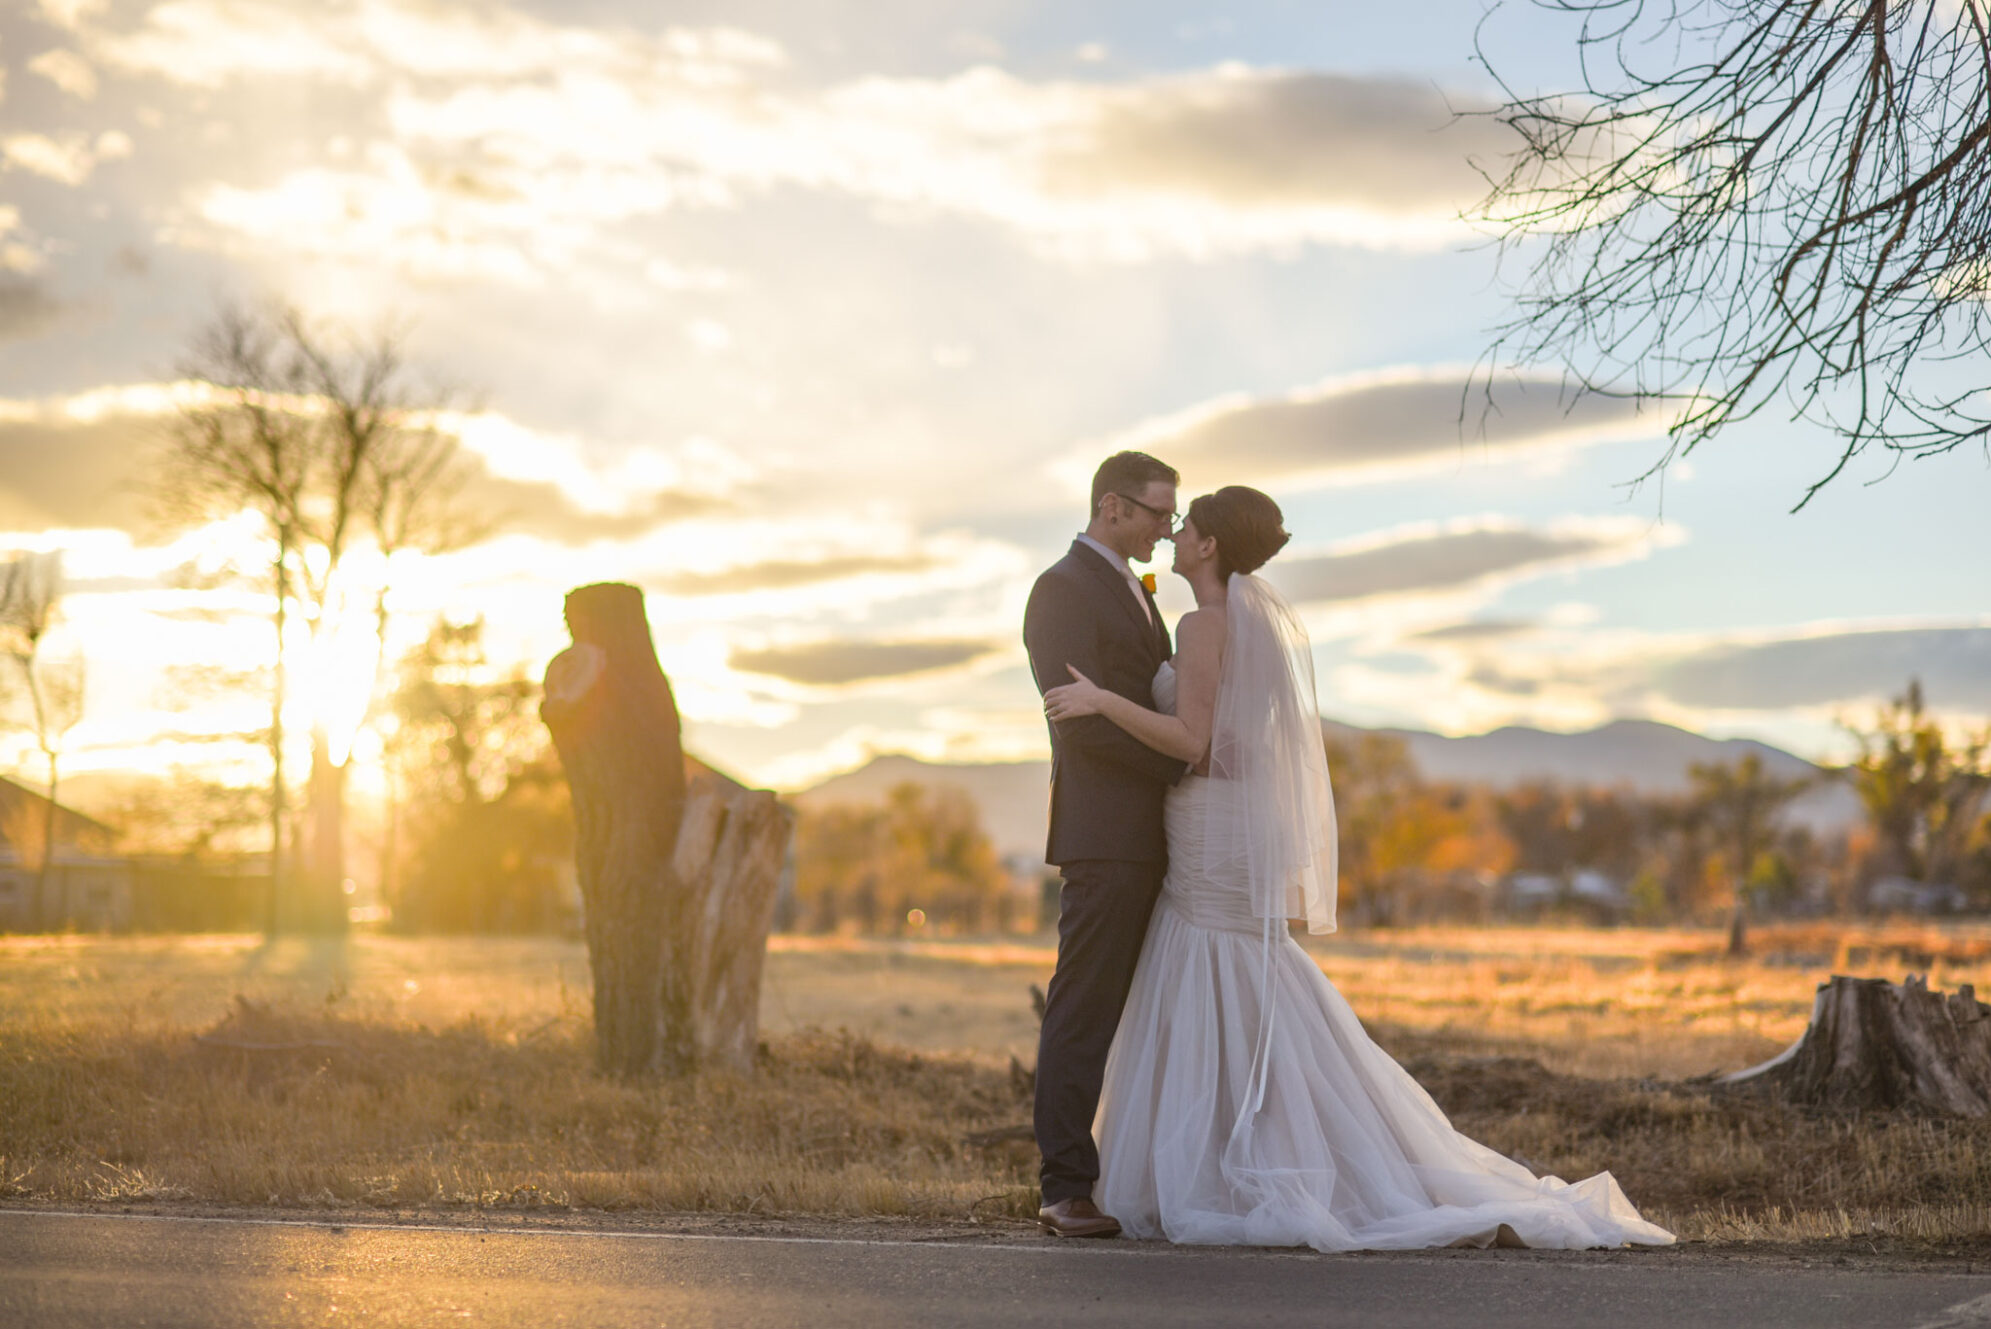 Lisa & Charles | Church Ranch Event Center | Westminster, Colorado Wedding Photography